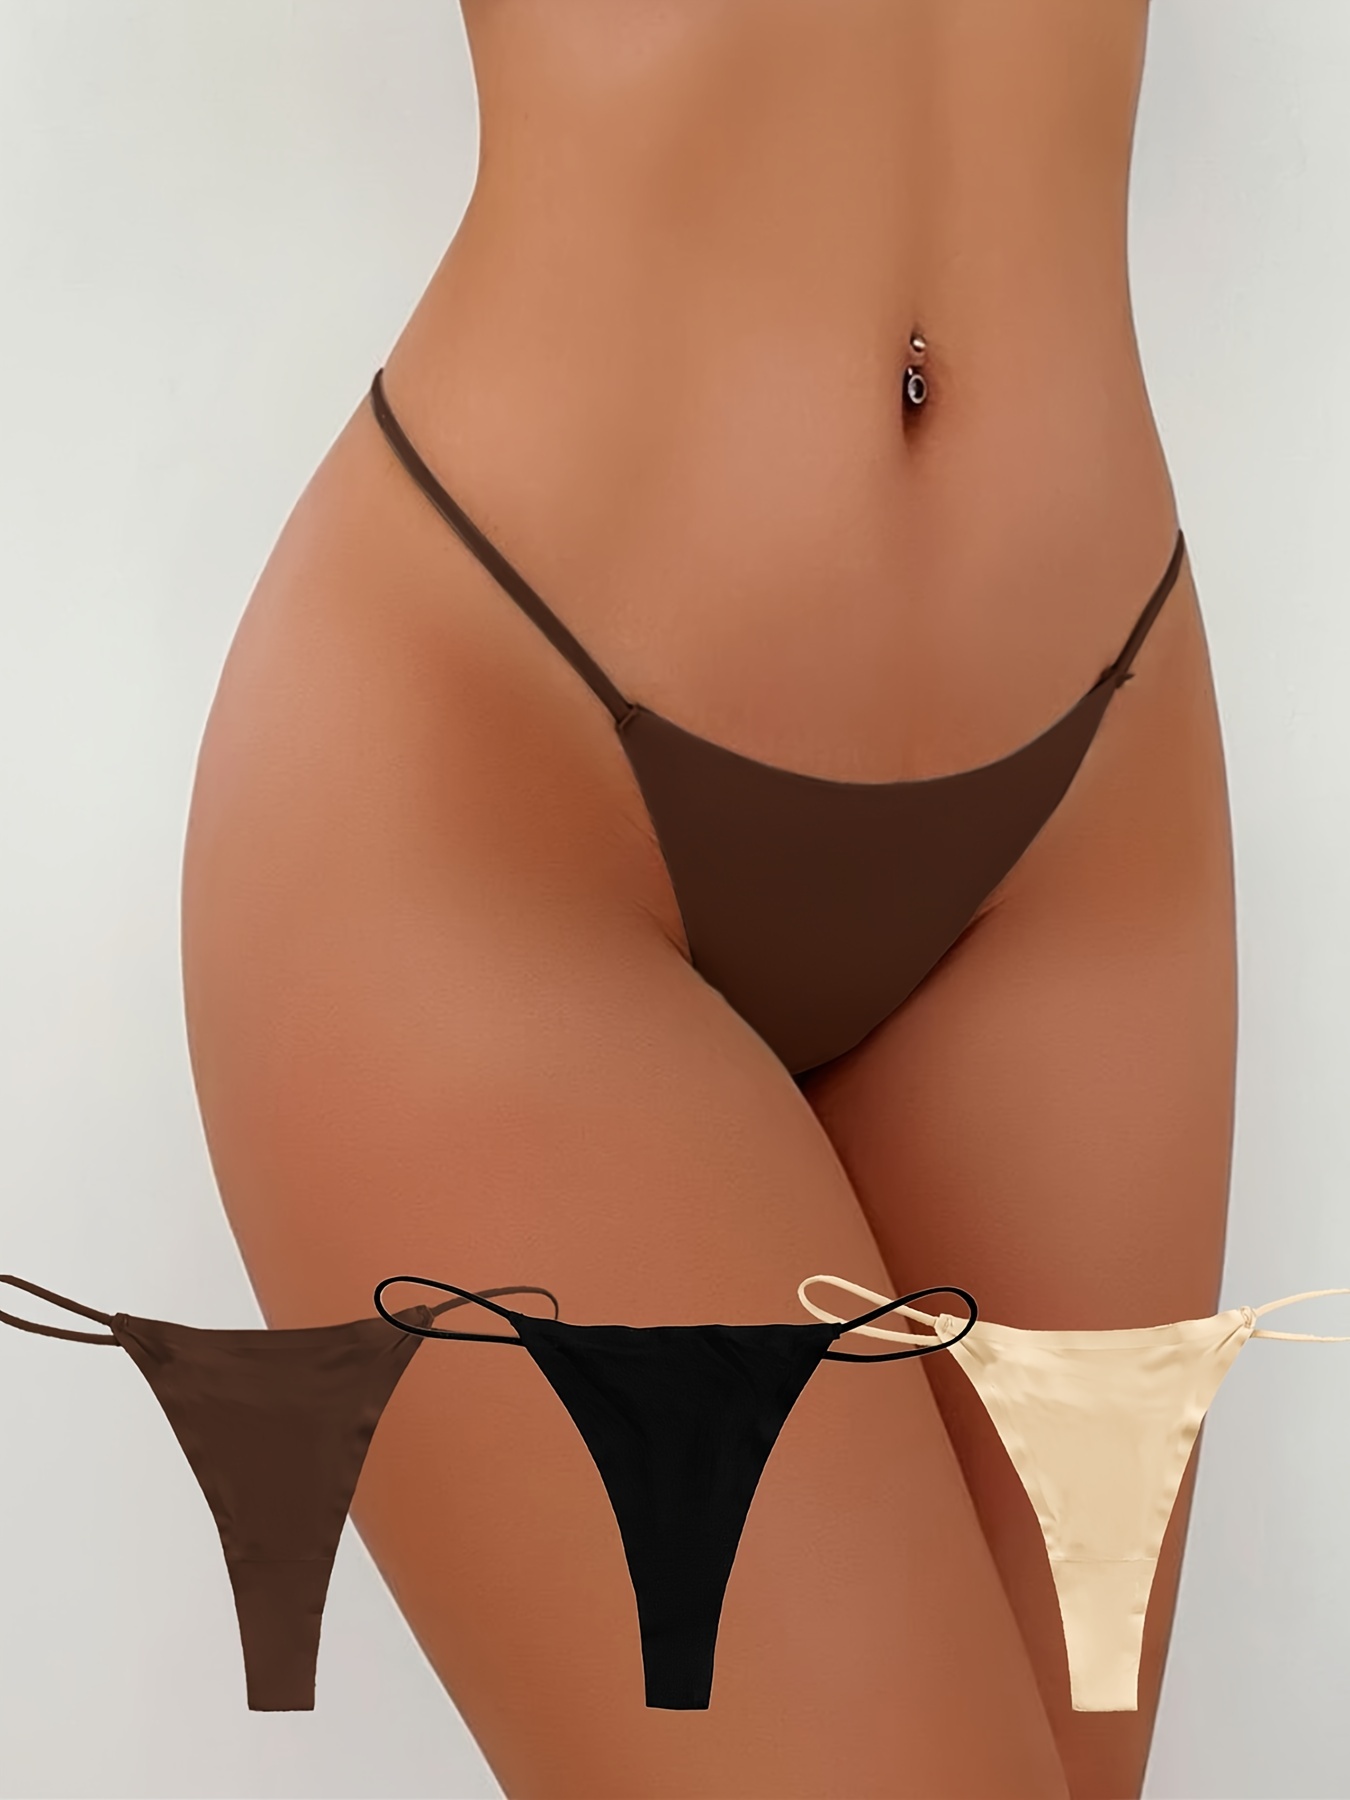 Hollow Out Stretch Bikini Thong for Women Seamless G-String